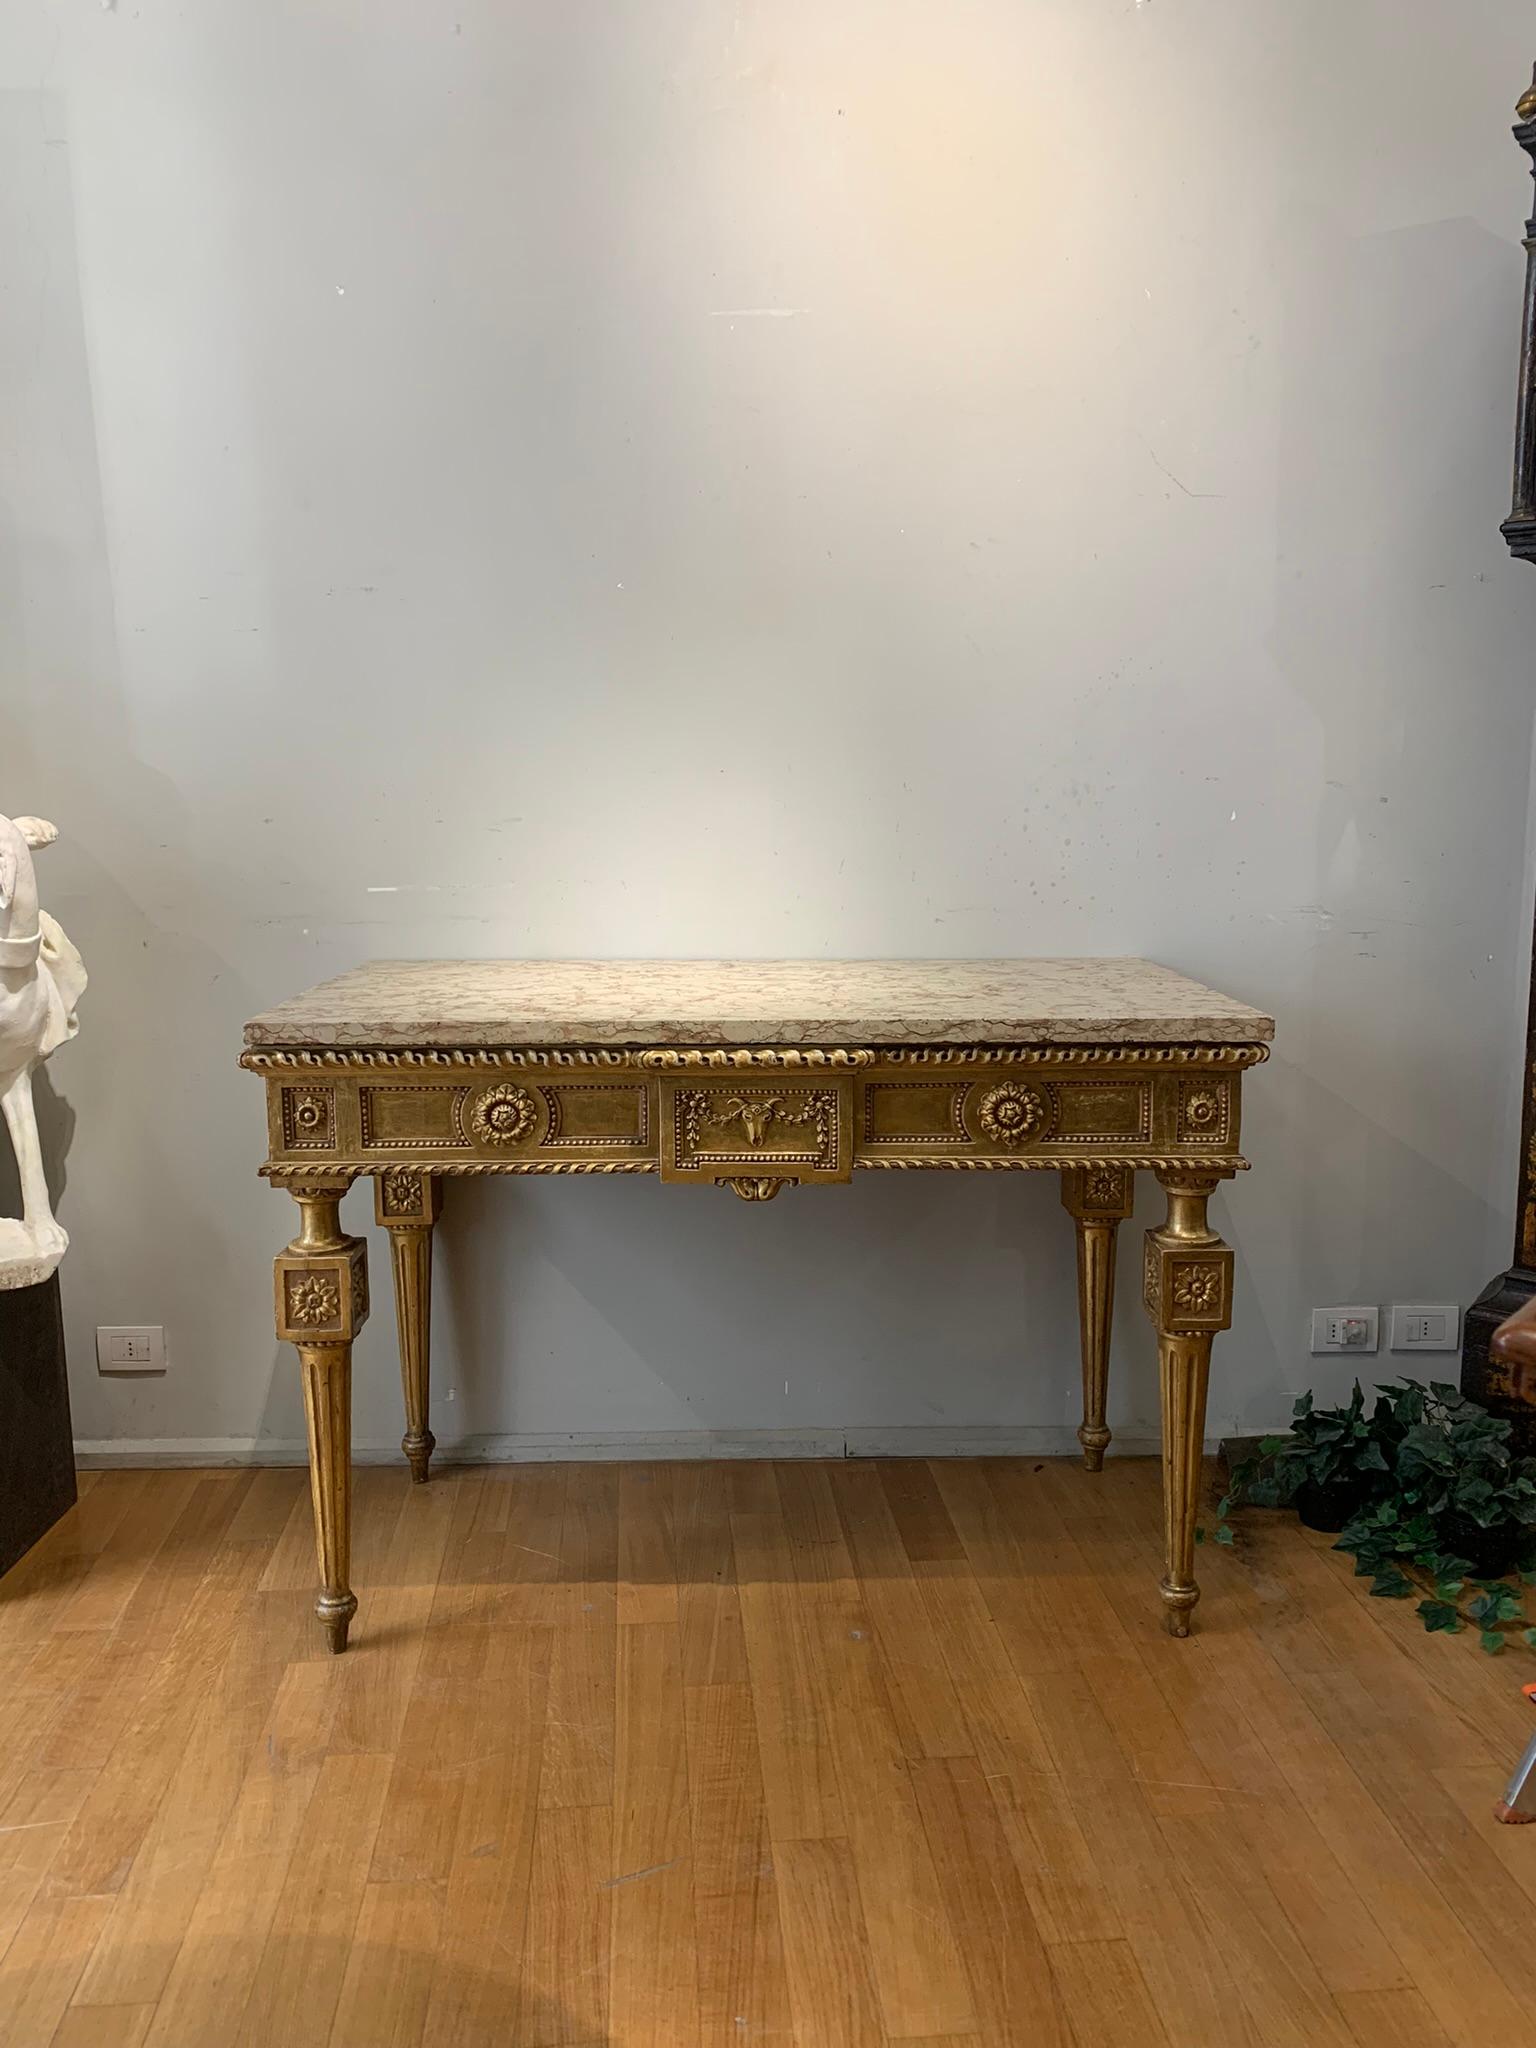 Stunning wall console in carved wood gilded with pure gold leaf, of Emilian manufacture from the end of the 18th century. It is an example of high manufacturing, characterized by detailed and refined craftsmanship. The carved wood features refined